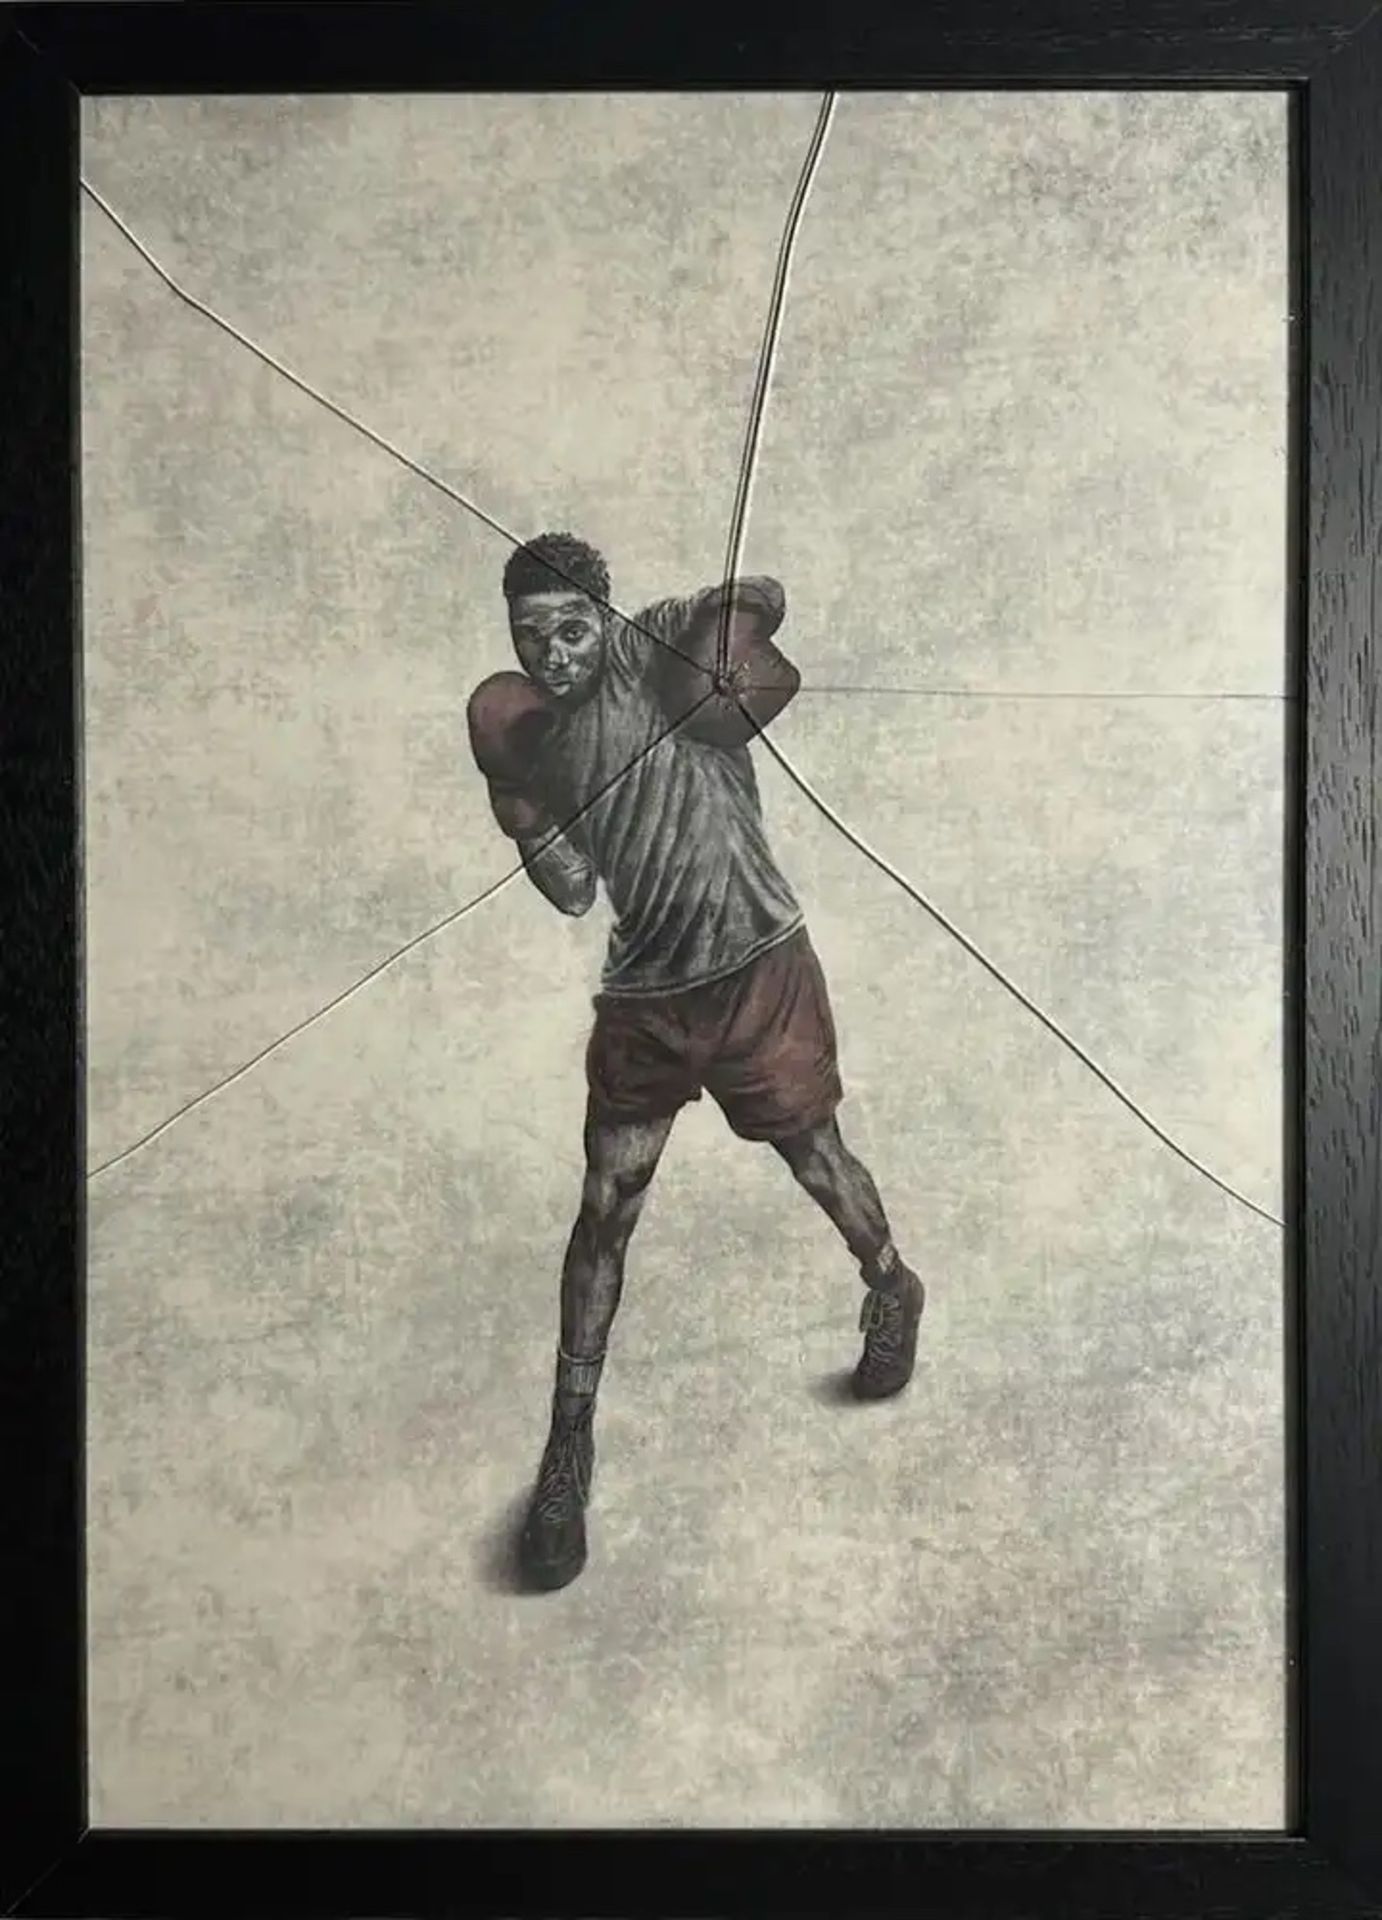 The Boxerâ€™ by Andrew Scott - Brand New, Authentic Art Piece - 1 of Only 192!